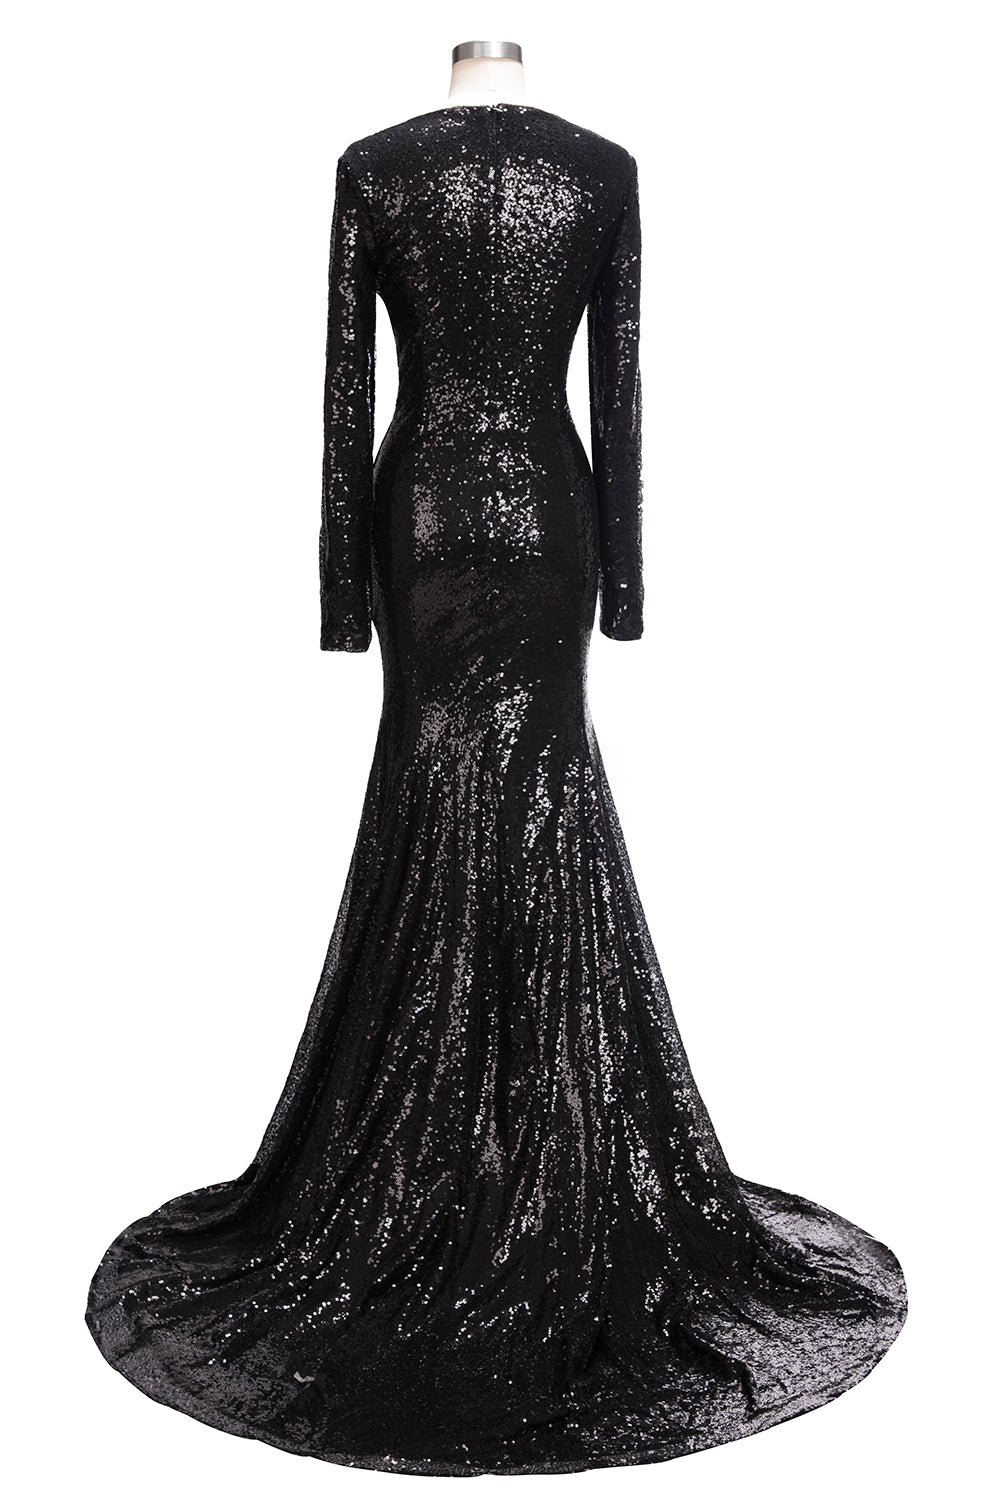 Long Mermaid V-Neck Black Sequins Prom Dresses with Sleeves-BIZTUNNEL